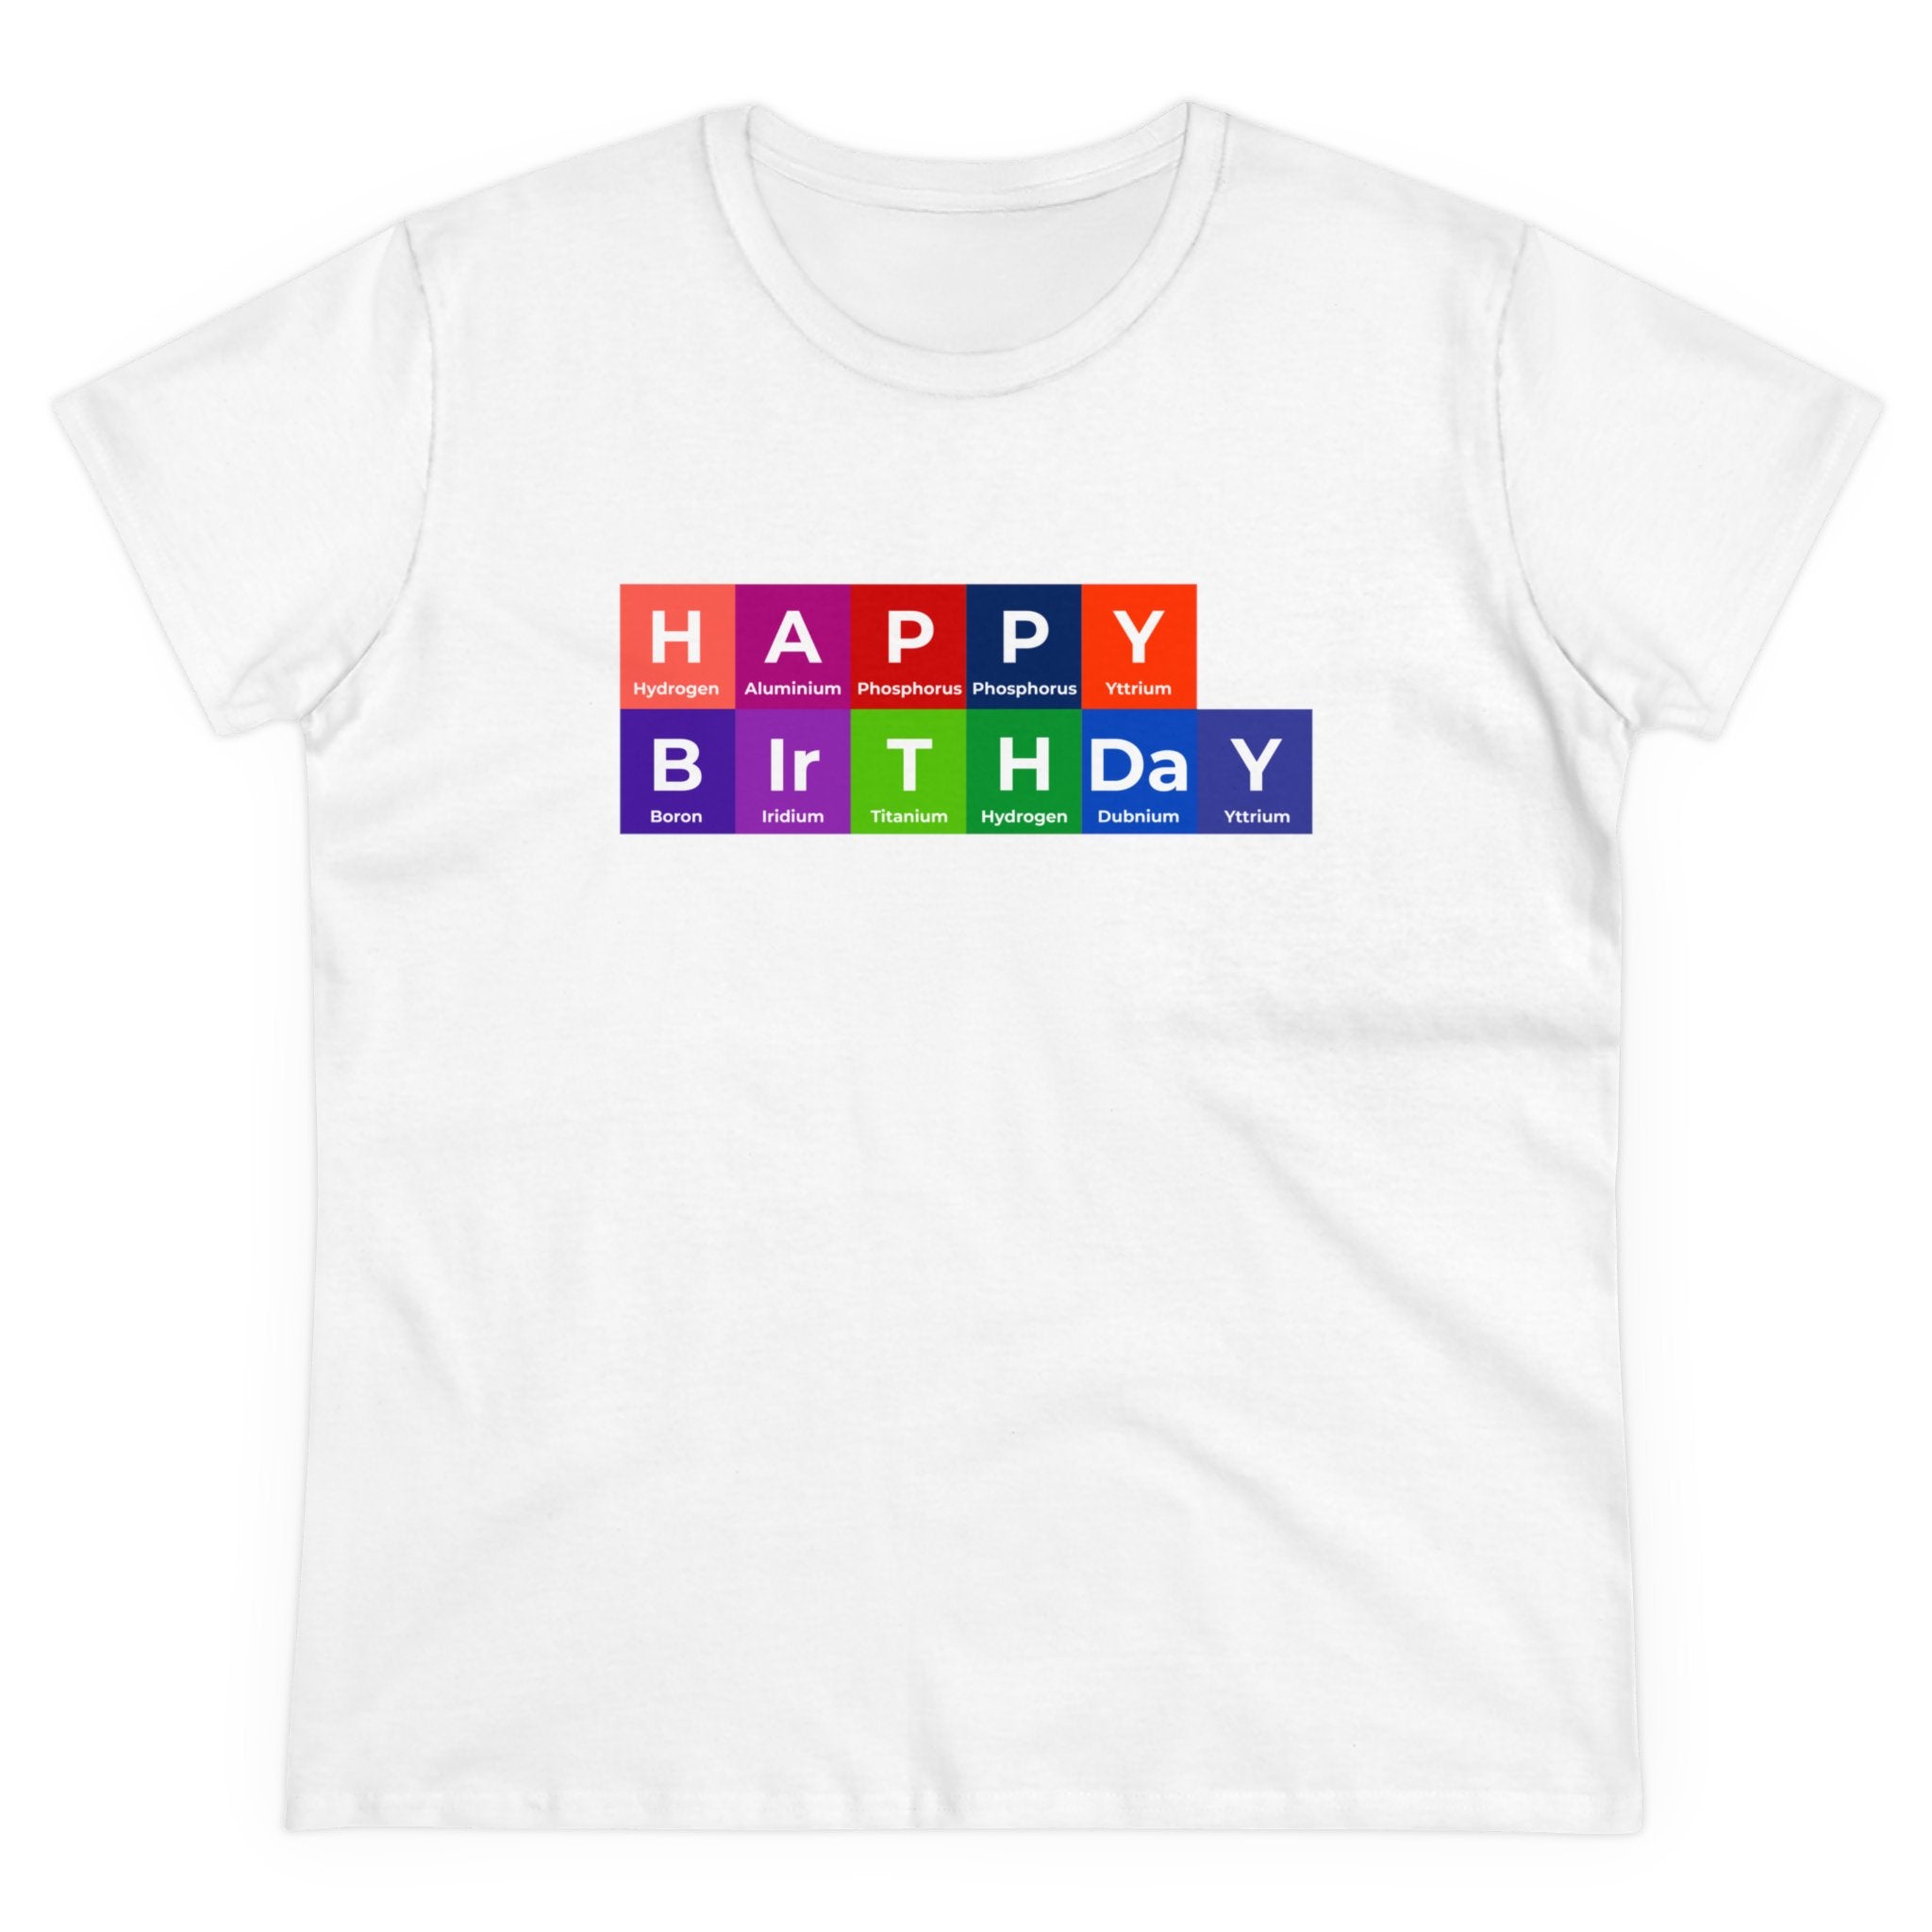 Happy Birthday - Women's Tee featuring "HAPPY BIRTHDAY" written using periodic table elements in colorful blocks on the front, blending comfort with festivity.